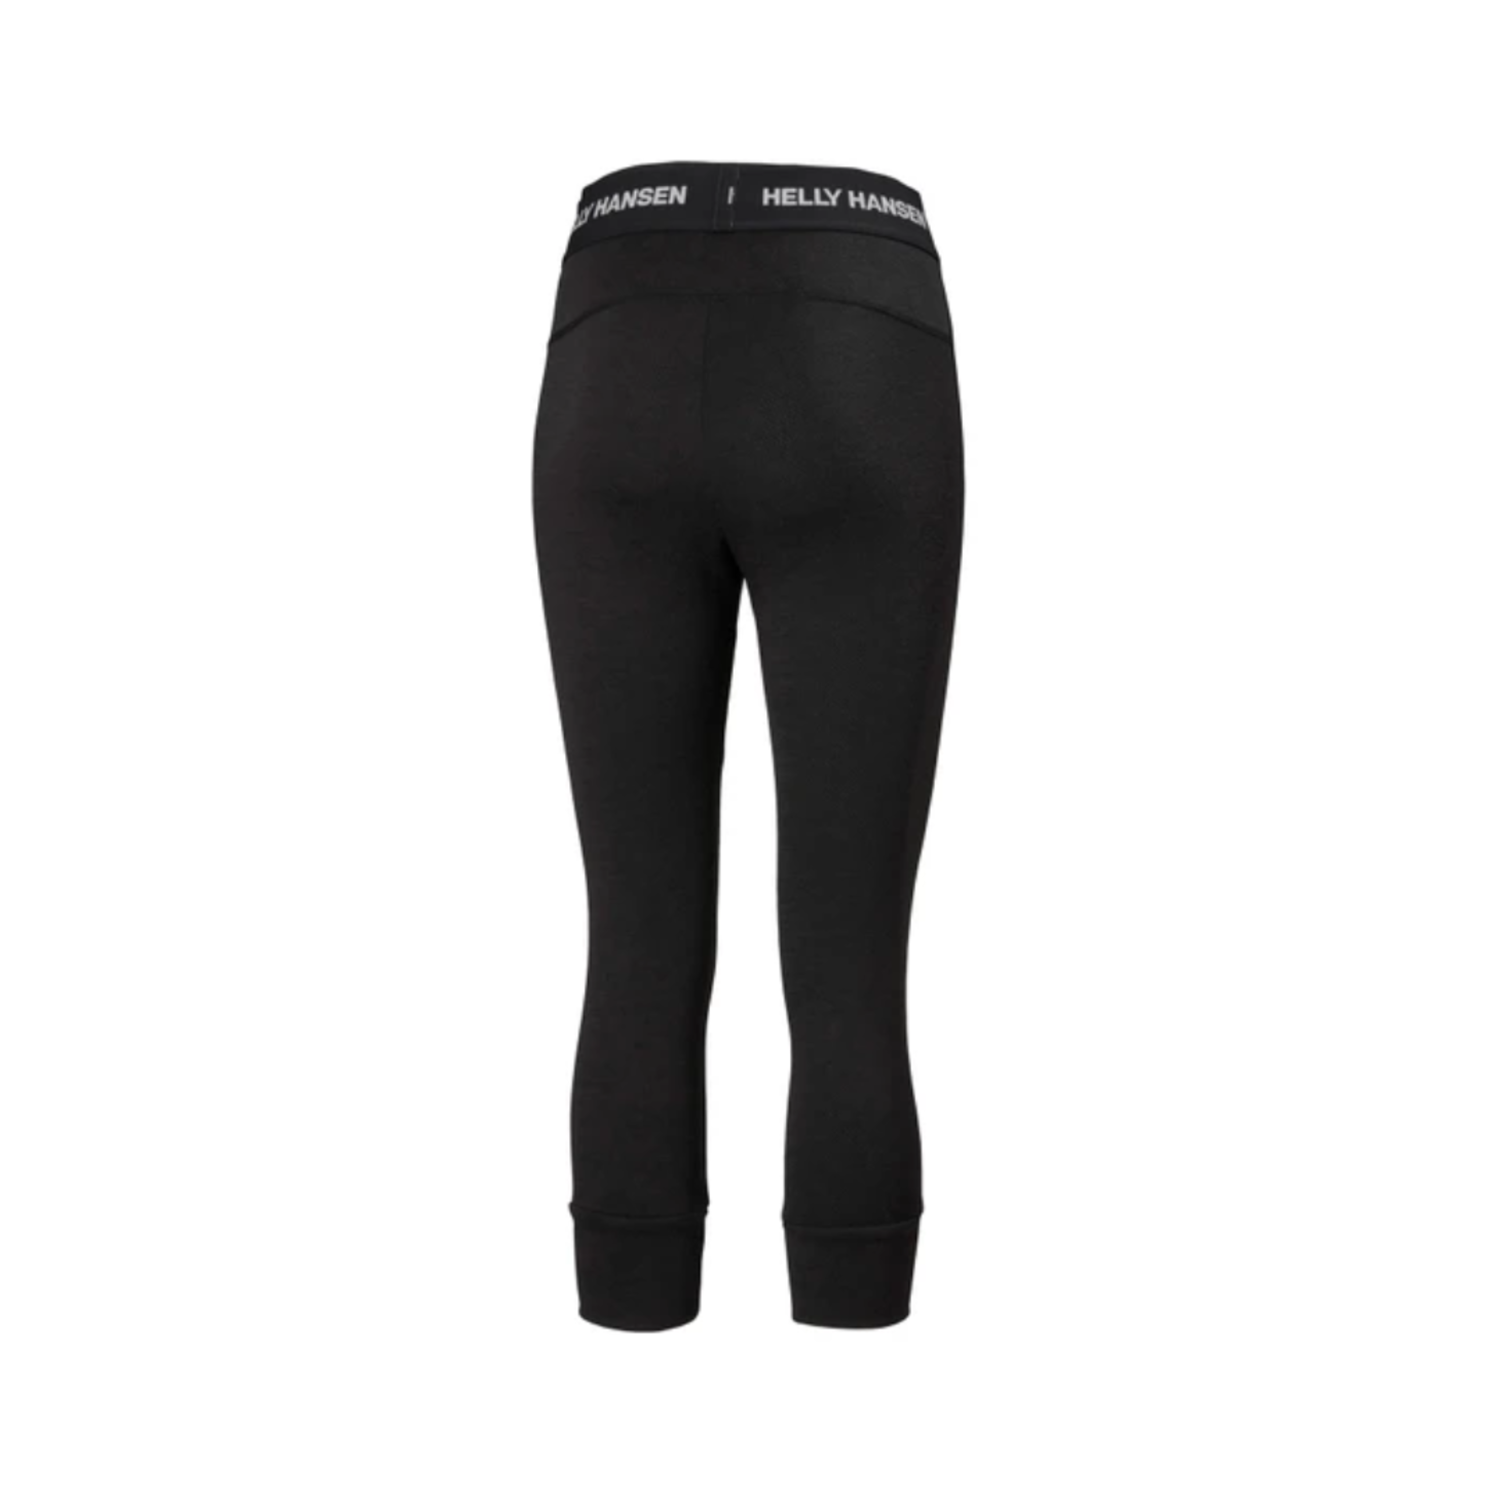 The Baselayer 3/4 Tight